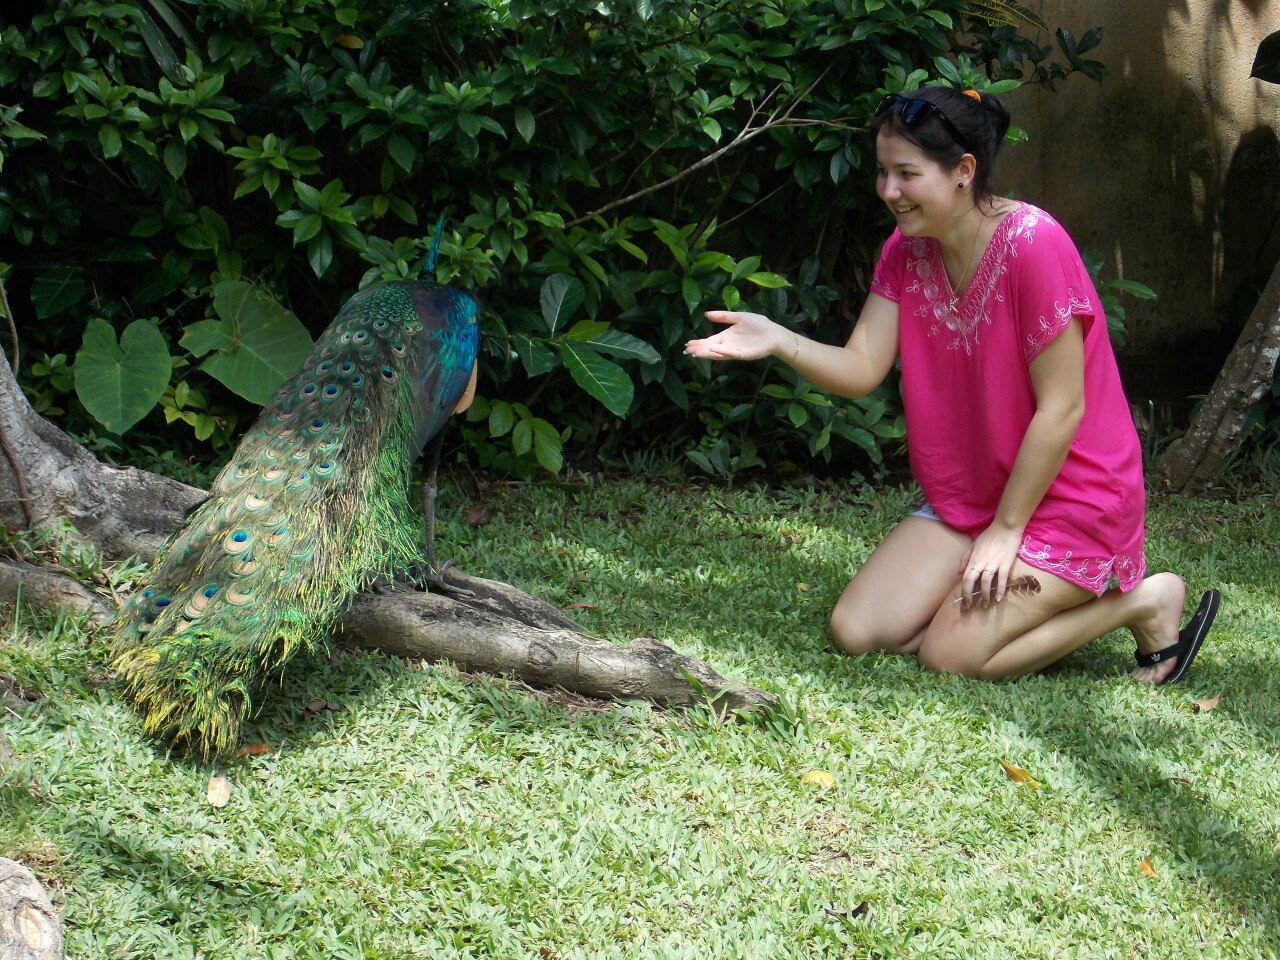 Well, a very petting zoo - My, Contact zoo, Wild peacock, Friend, Indonesia